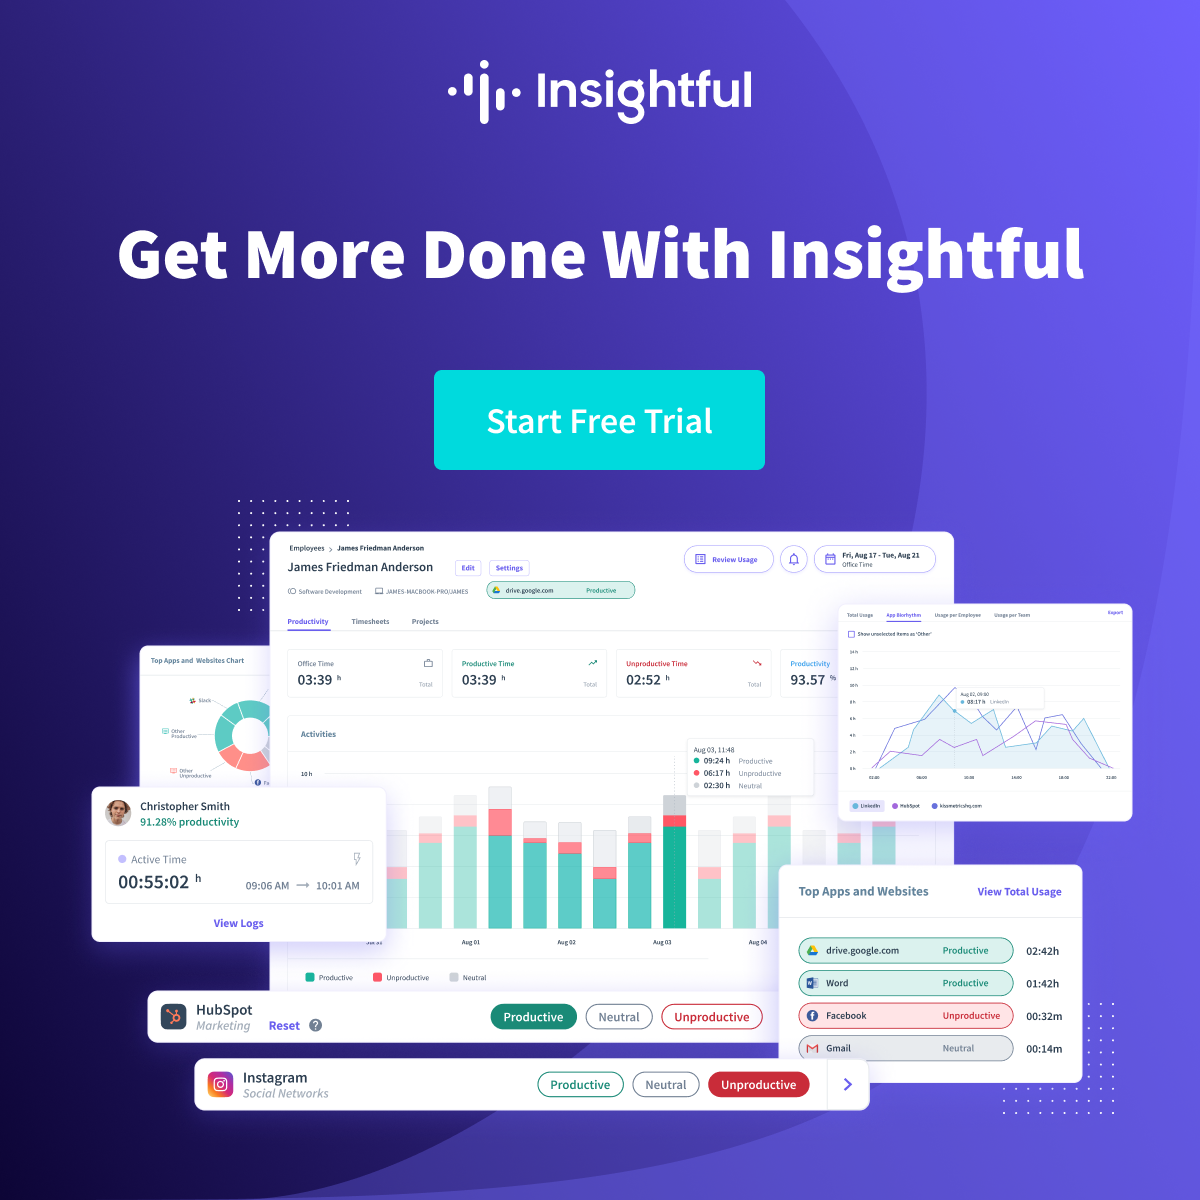  Insightful empowers your organization to analyze and optimize employee performance, productivity, and efficiency via deep behavioral data insights.